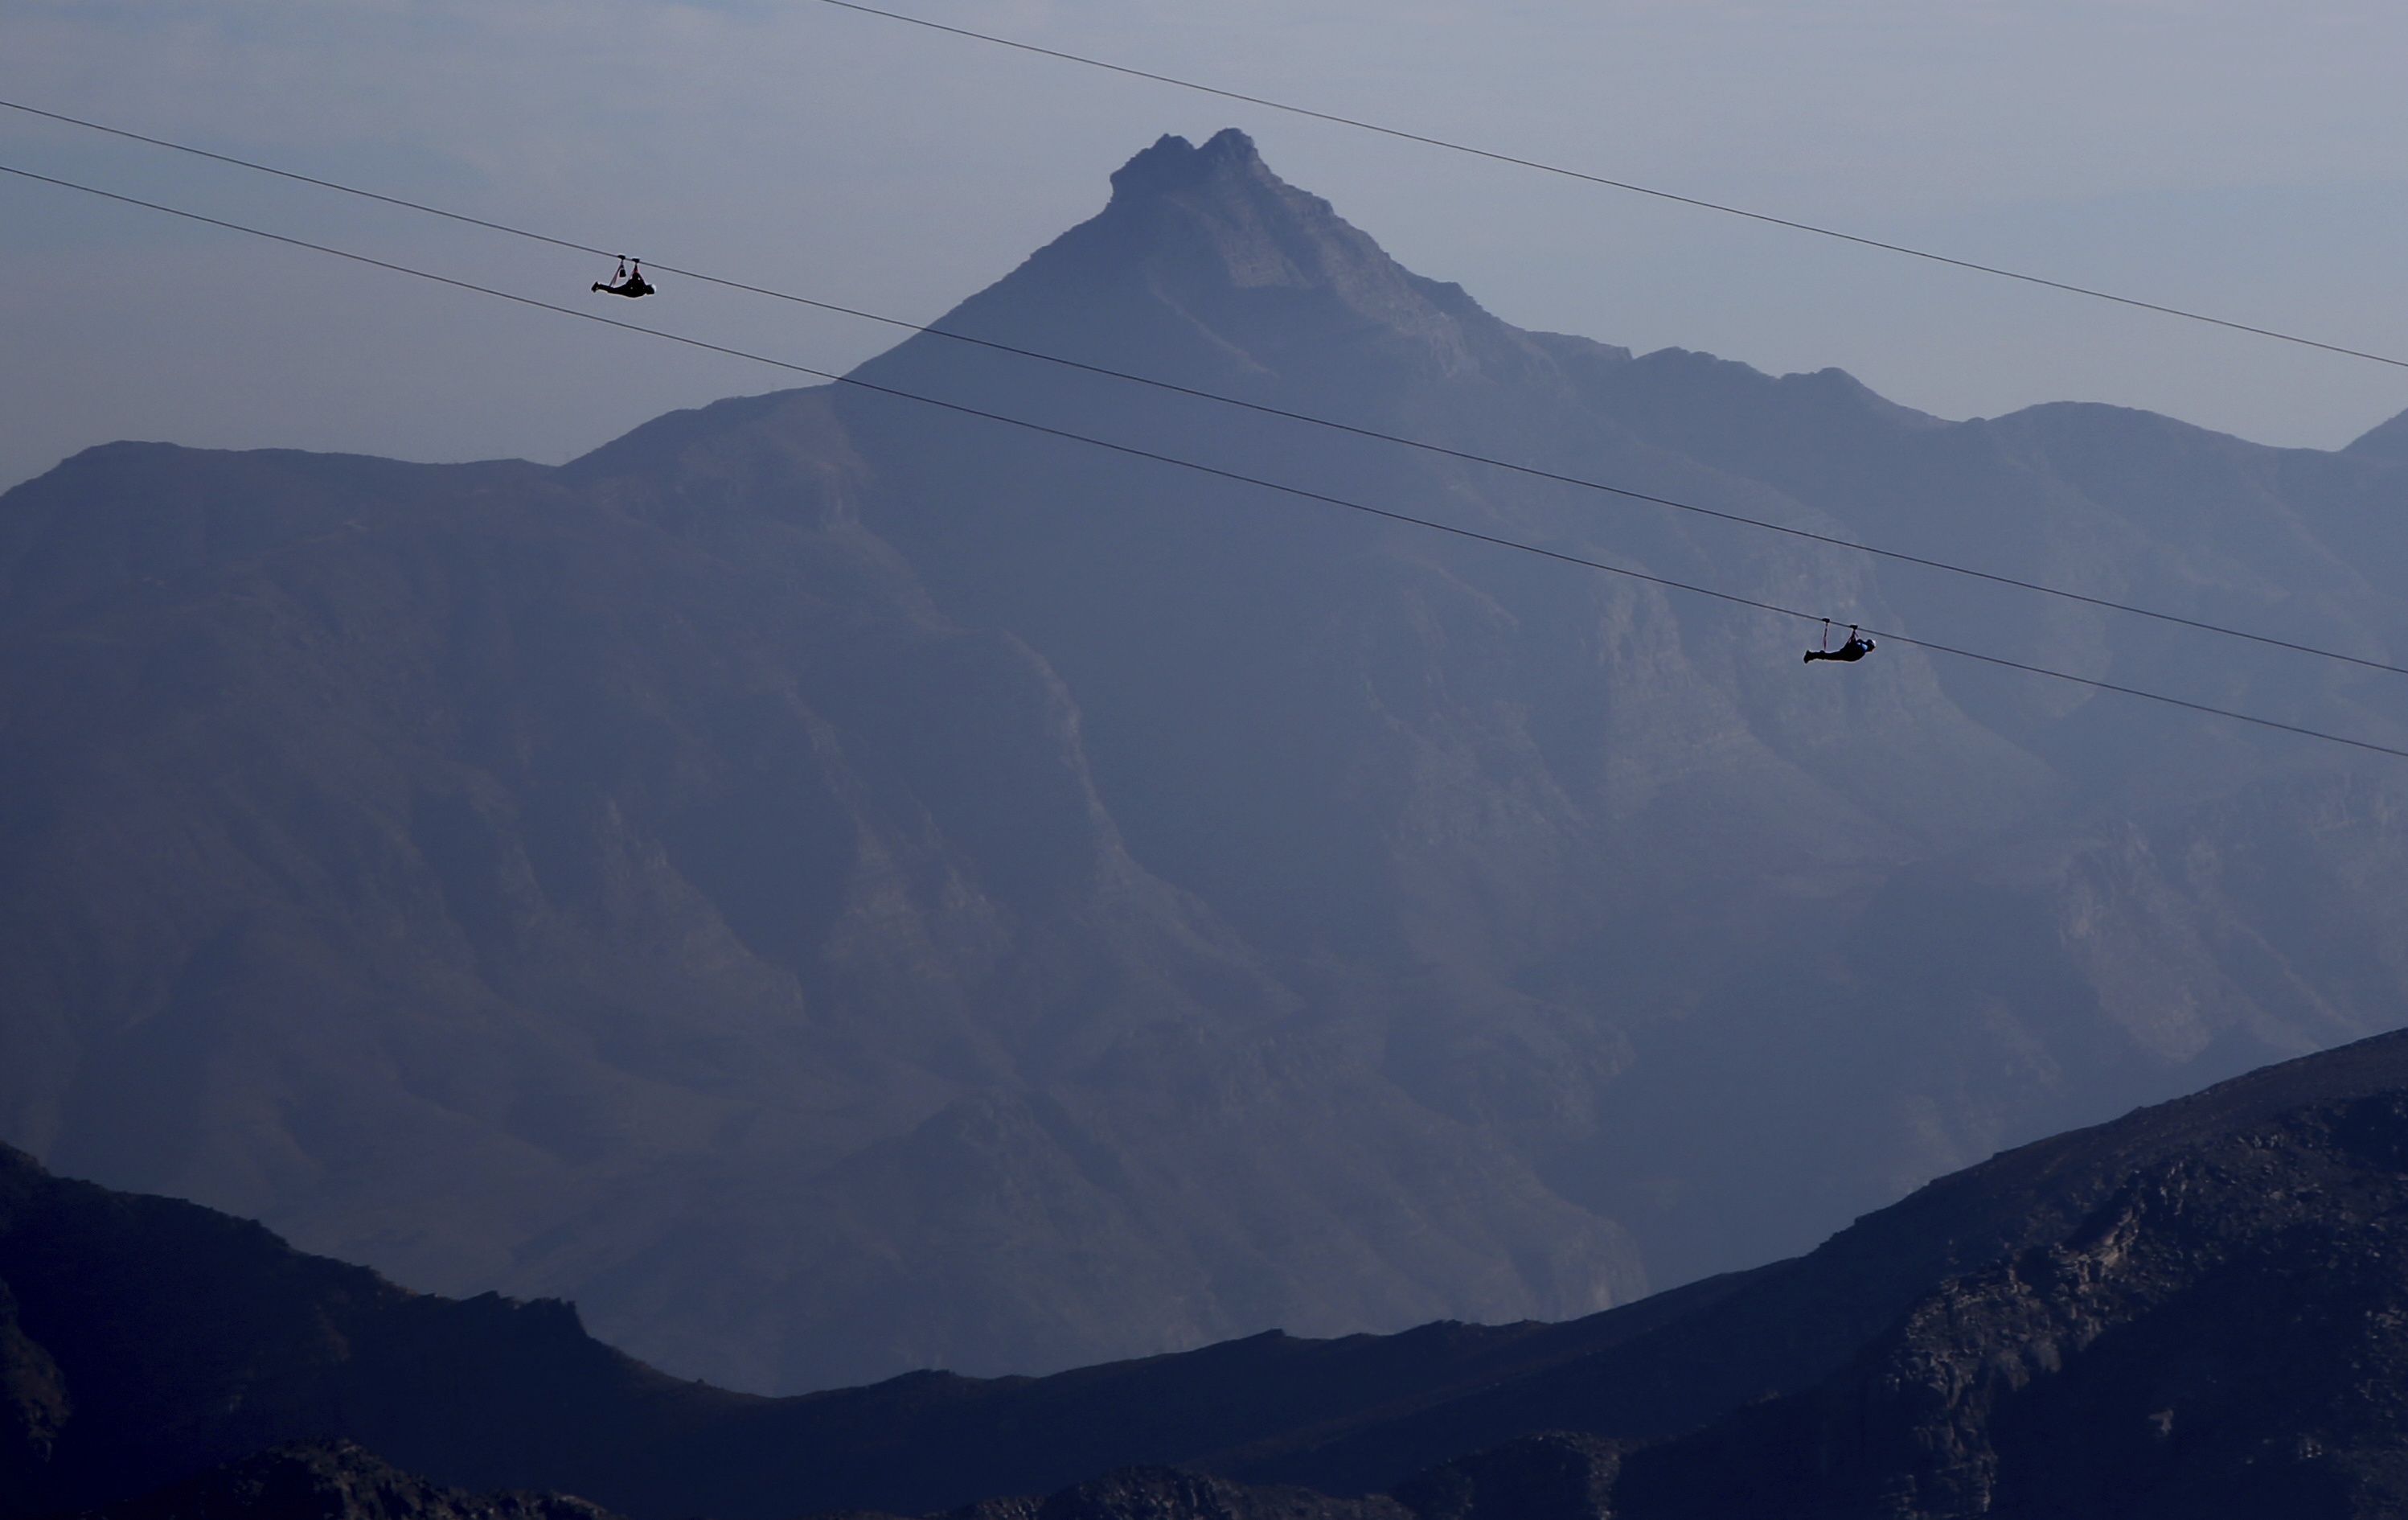 In this Wednesday, Jan. 31, 2018 photo, thrill-seekers descind from the UAE's highest mountain as they try out a new zip line, on the peak of Jebel Jais mountain, 25 kms (15.5 miles) north east of Ras al-Khaimah, United Arab Emirates. The UAE is claiming a new world record with the opening of the world's longest zip line, measuring 2.83 kilometers (1.76 miles) in length. Guinness World Records officials certified the zip line on Thursday, the same day the attraction opened to the public. (AP Photo/Kamran Jebreili)